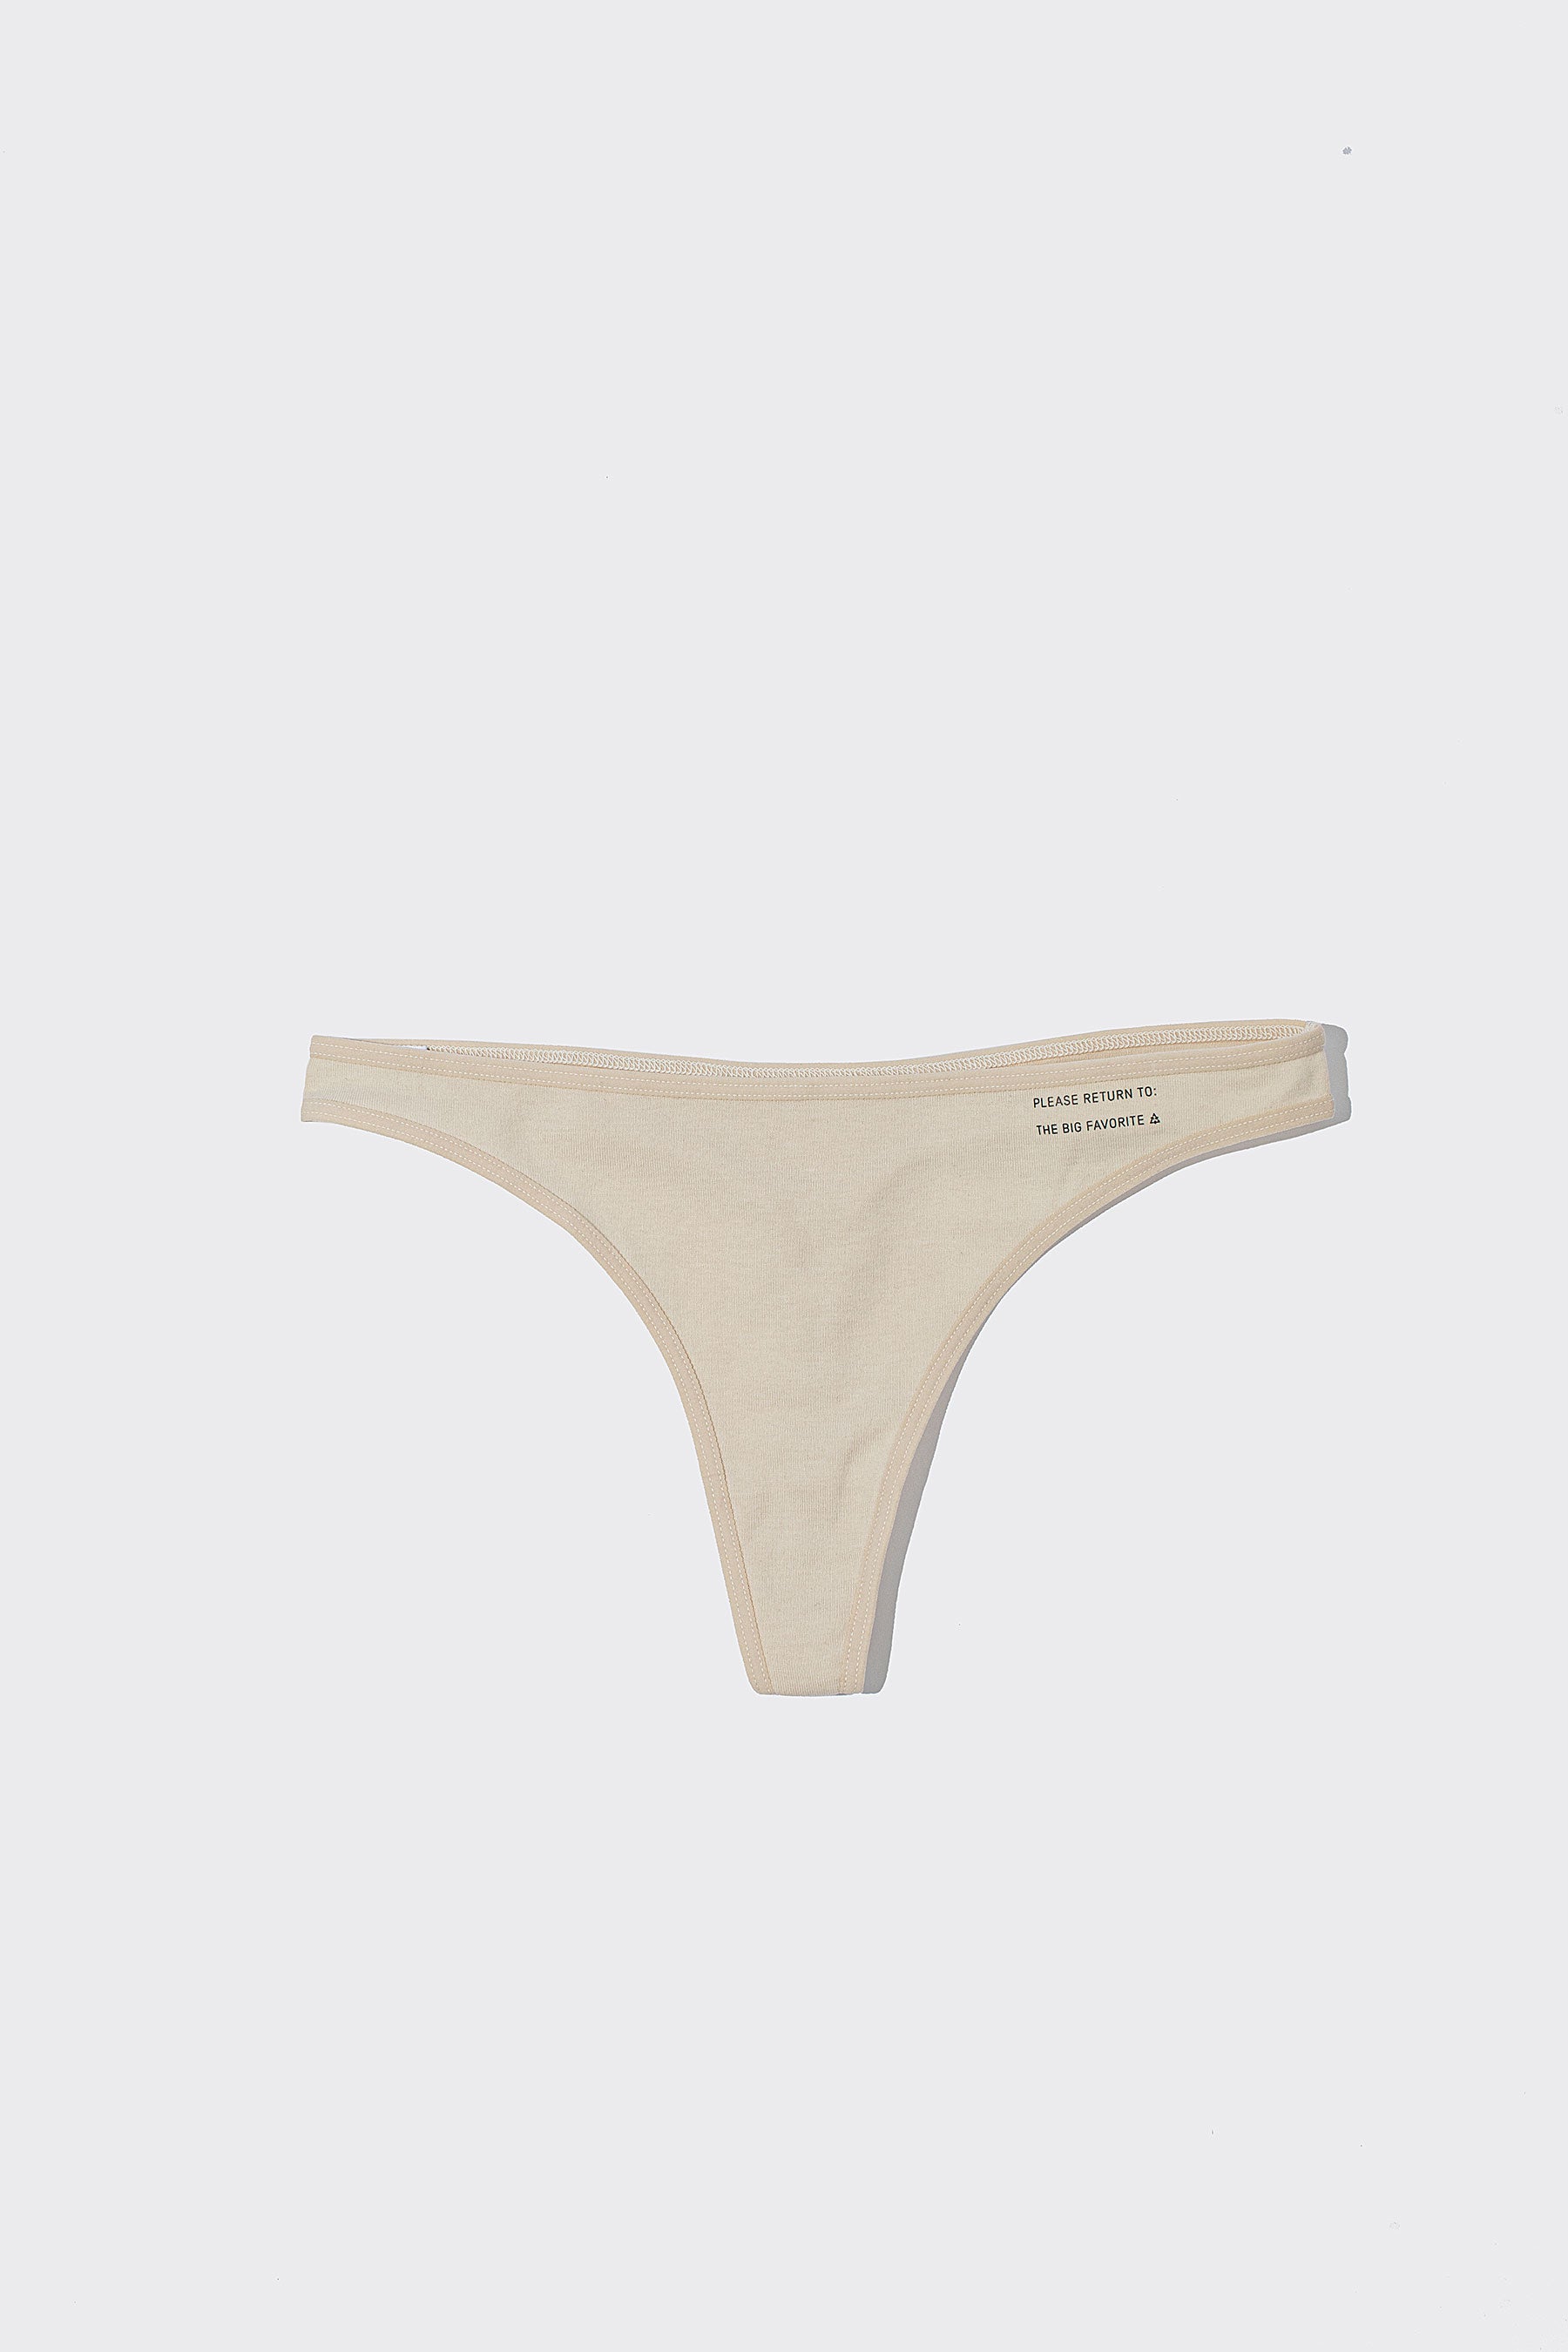 The Undyed Thong – The Big Favorite